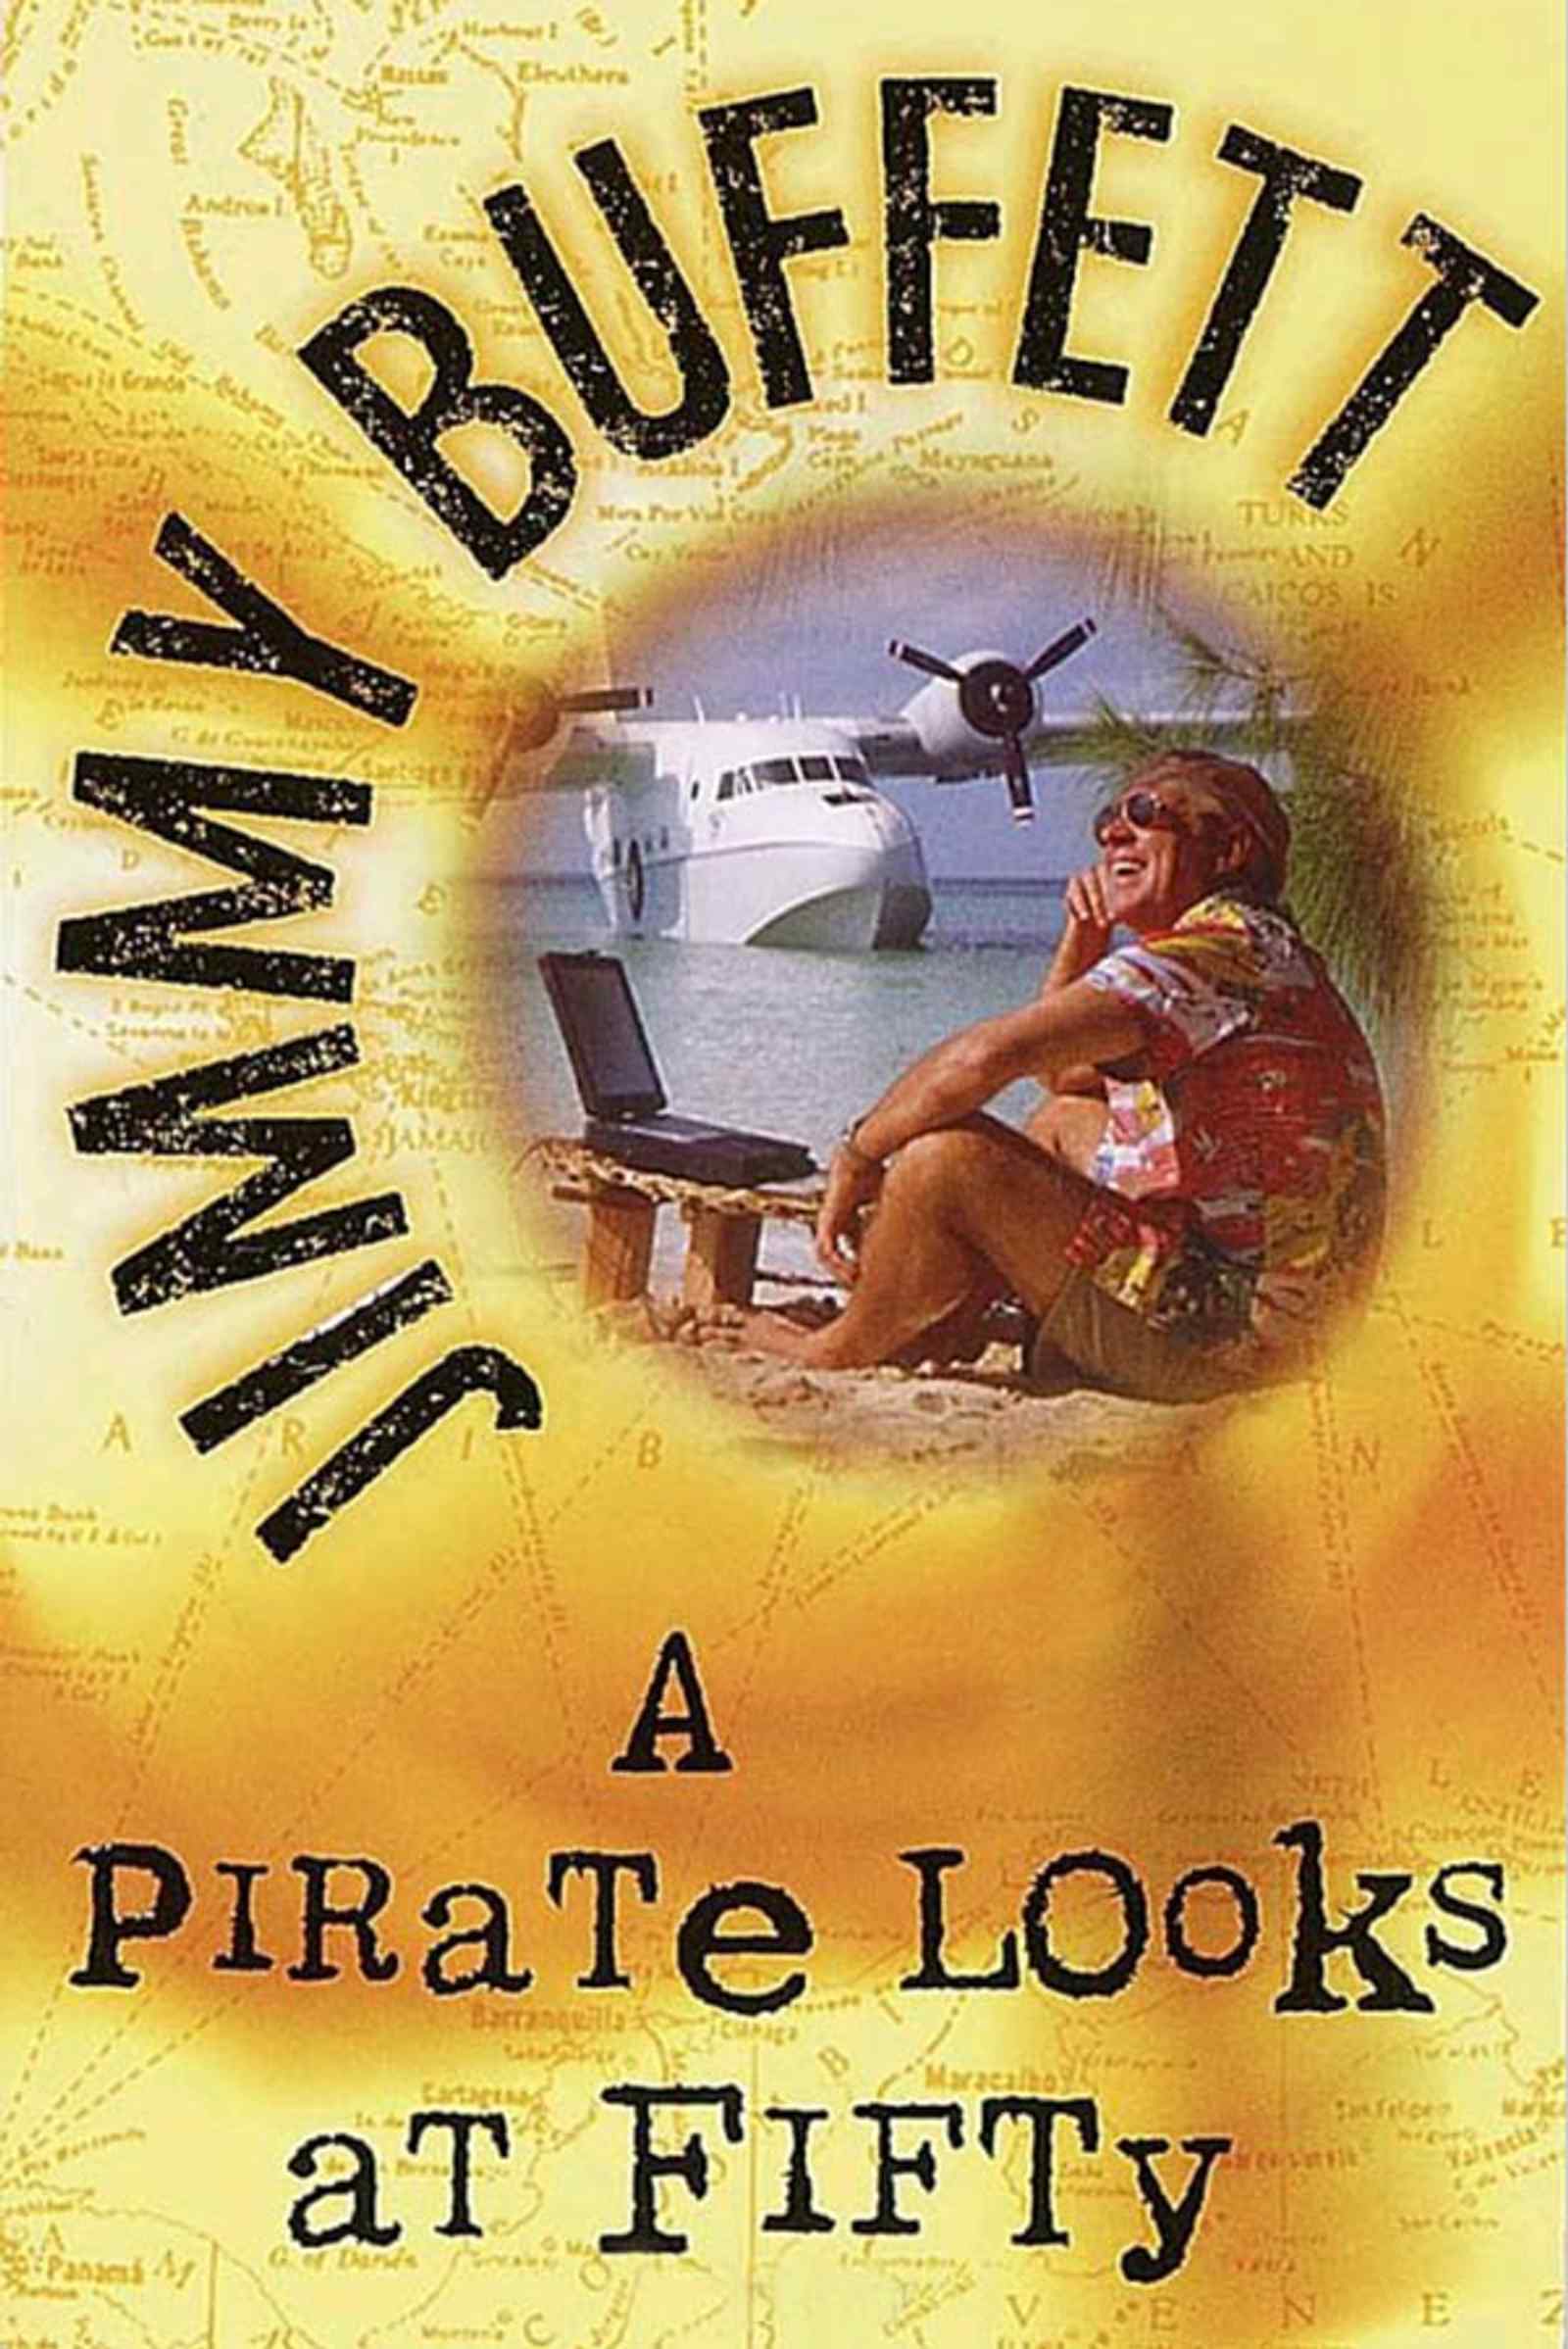 A Pirate Looks At Fifty